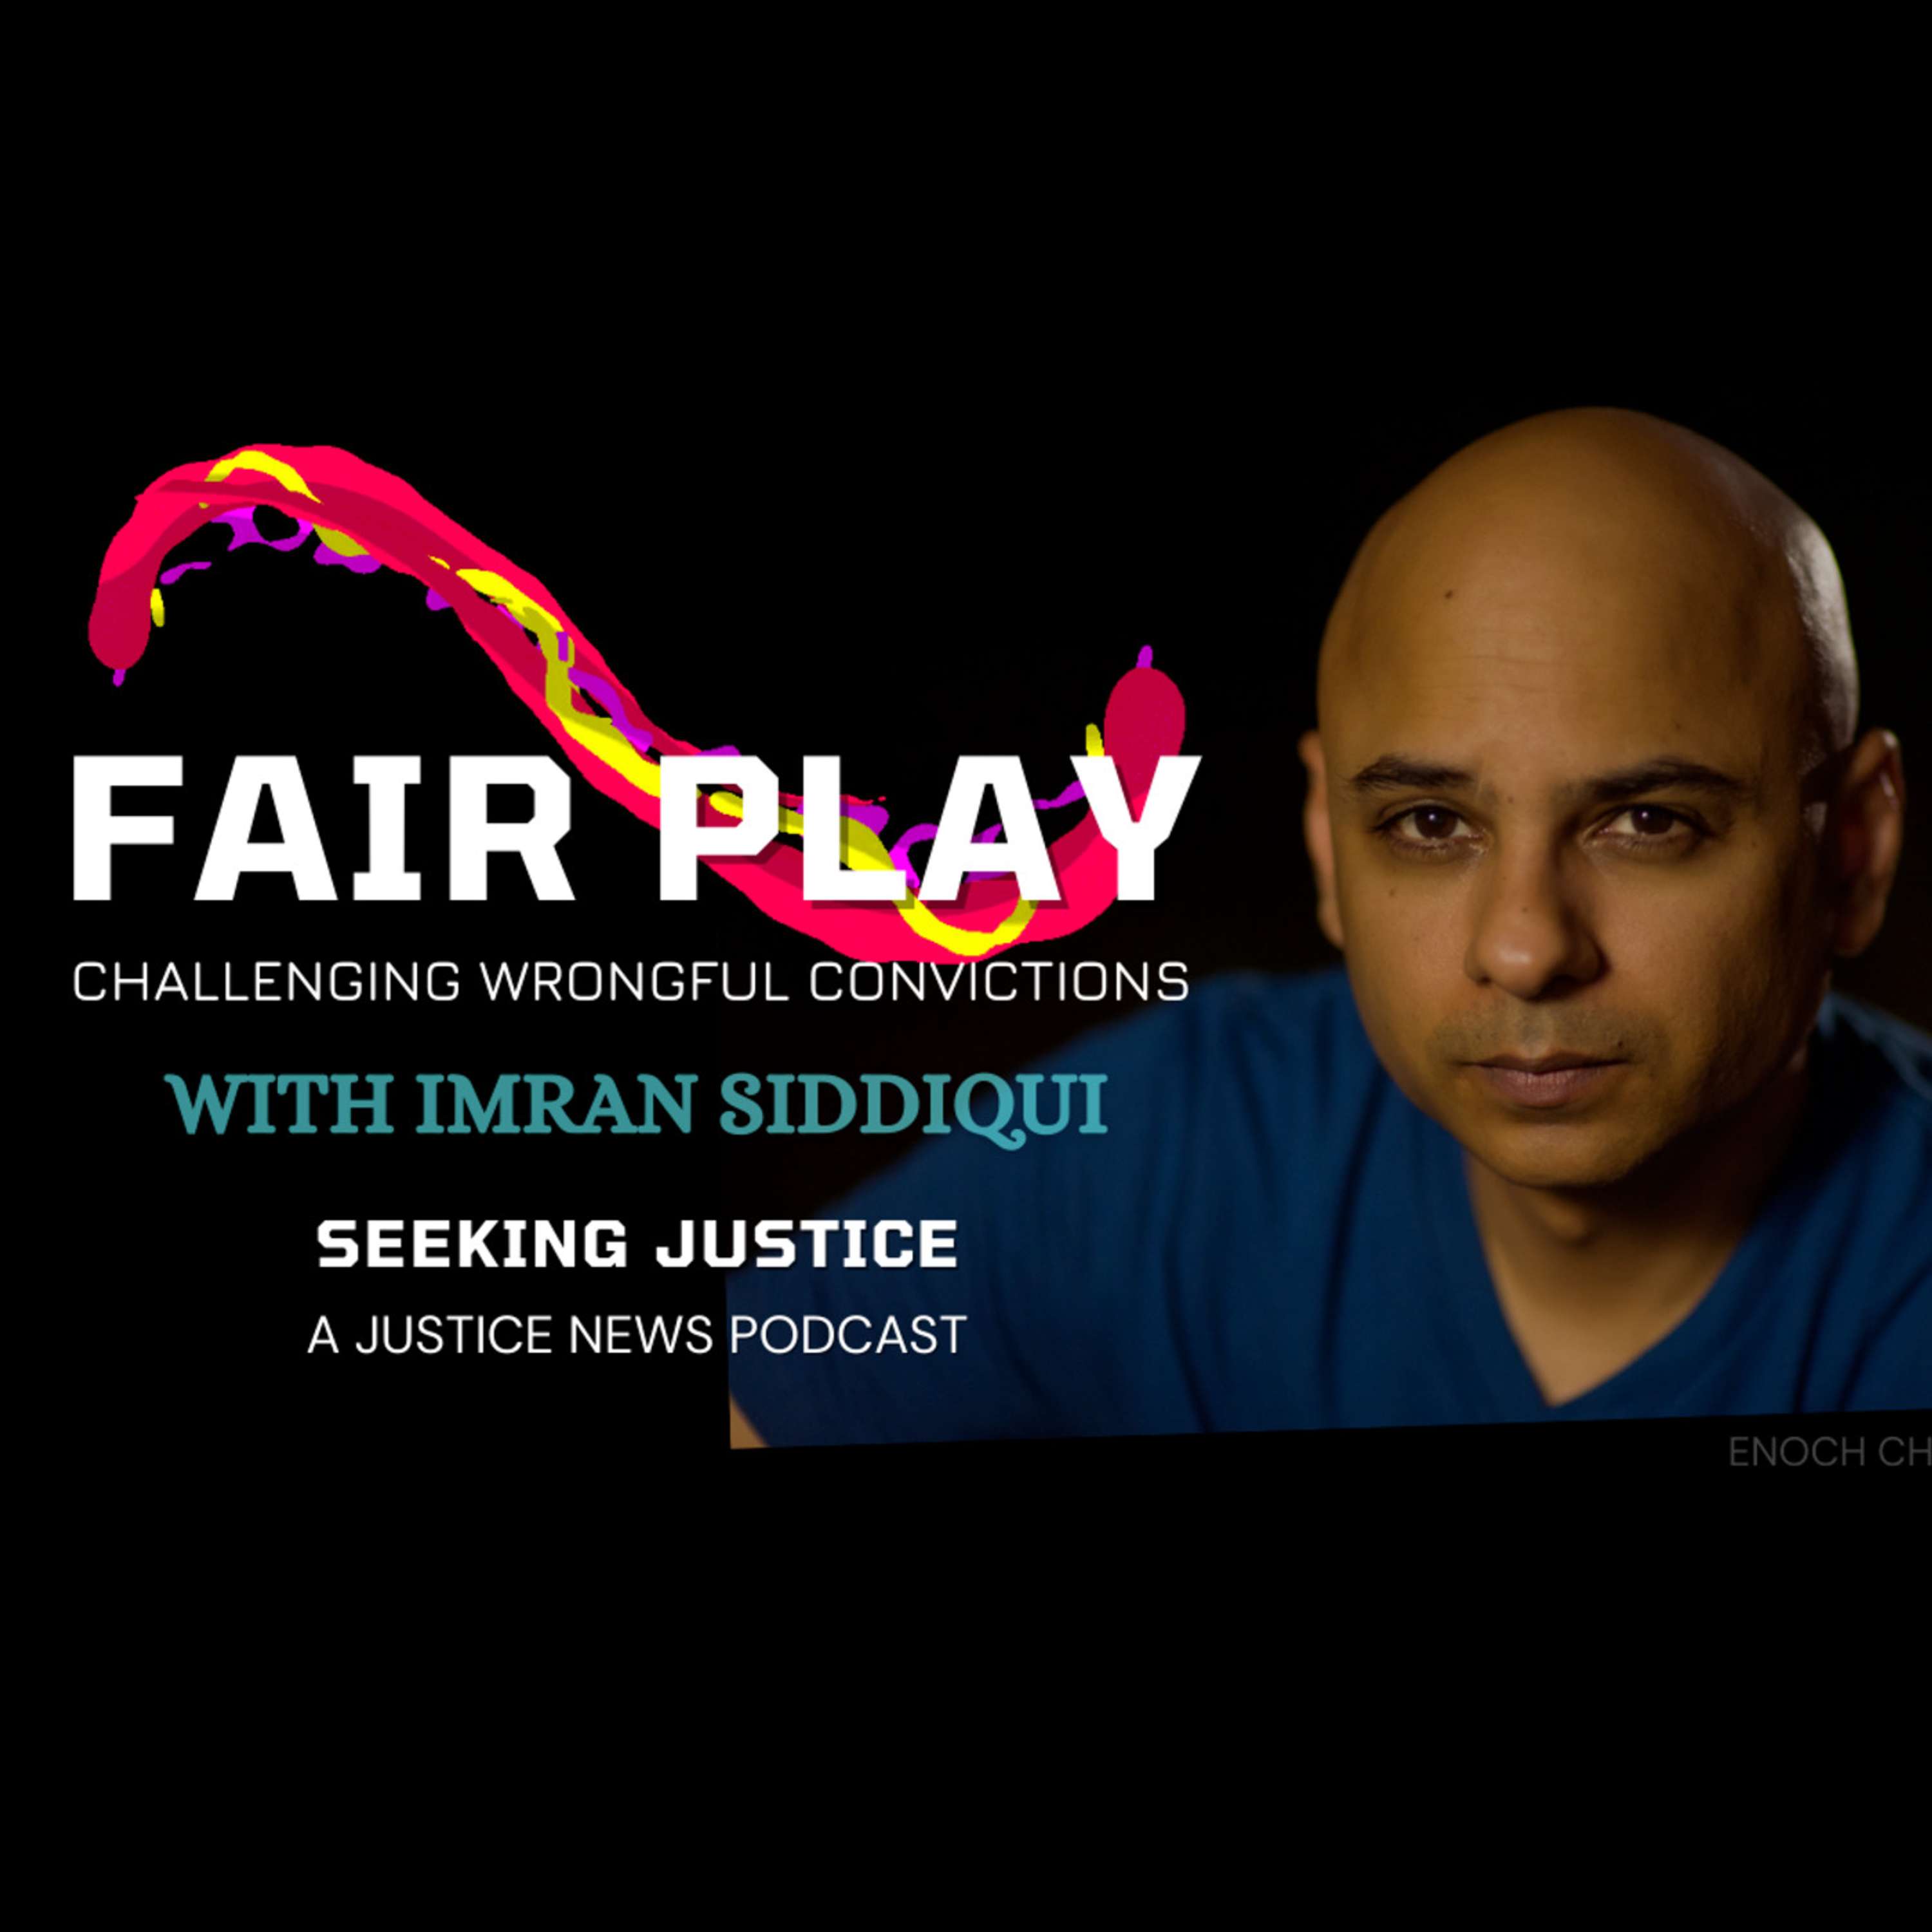 FairPlay | Challenge Wrongful Convictions with Imran Siddiqui